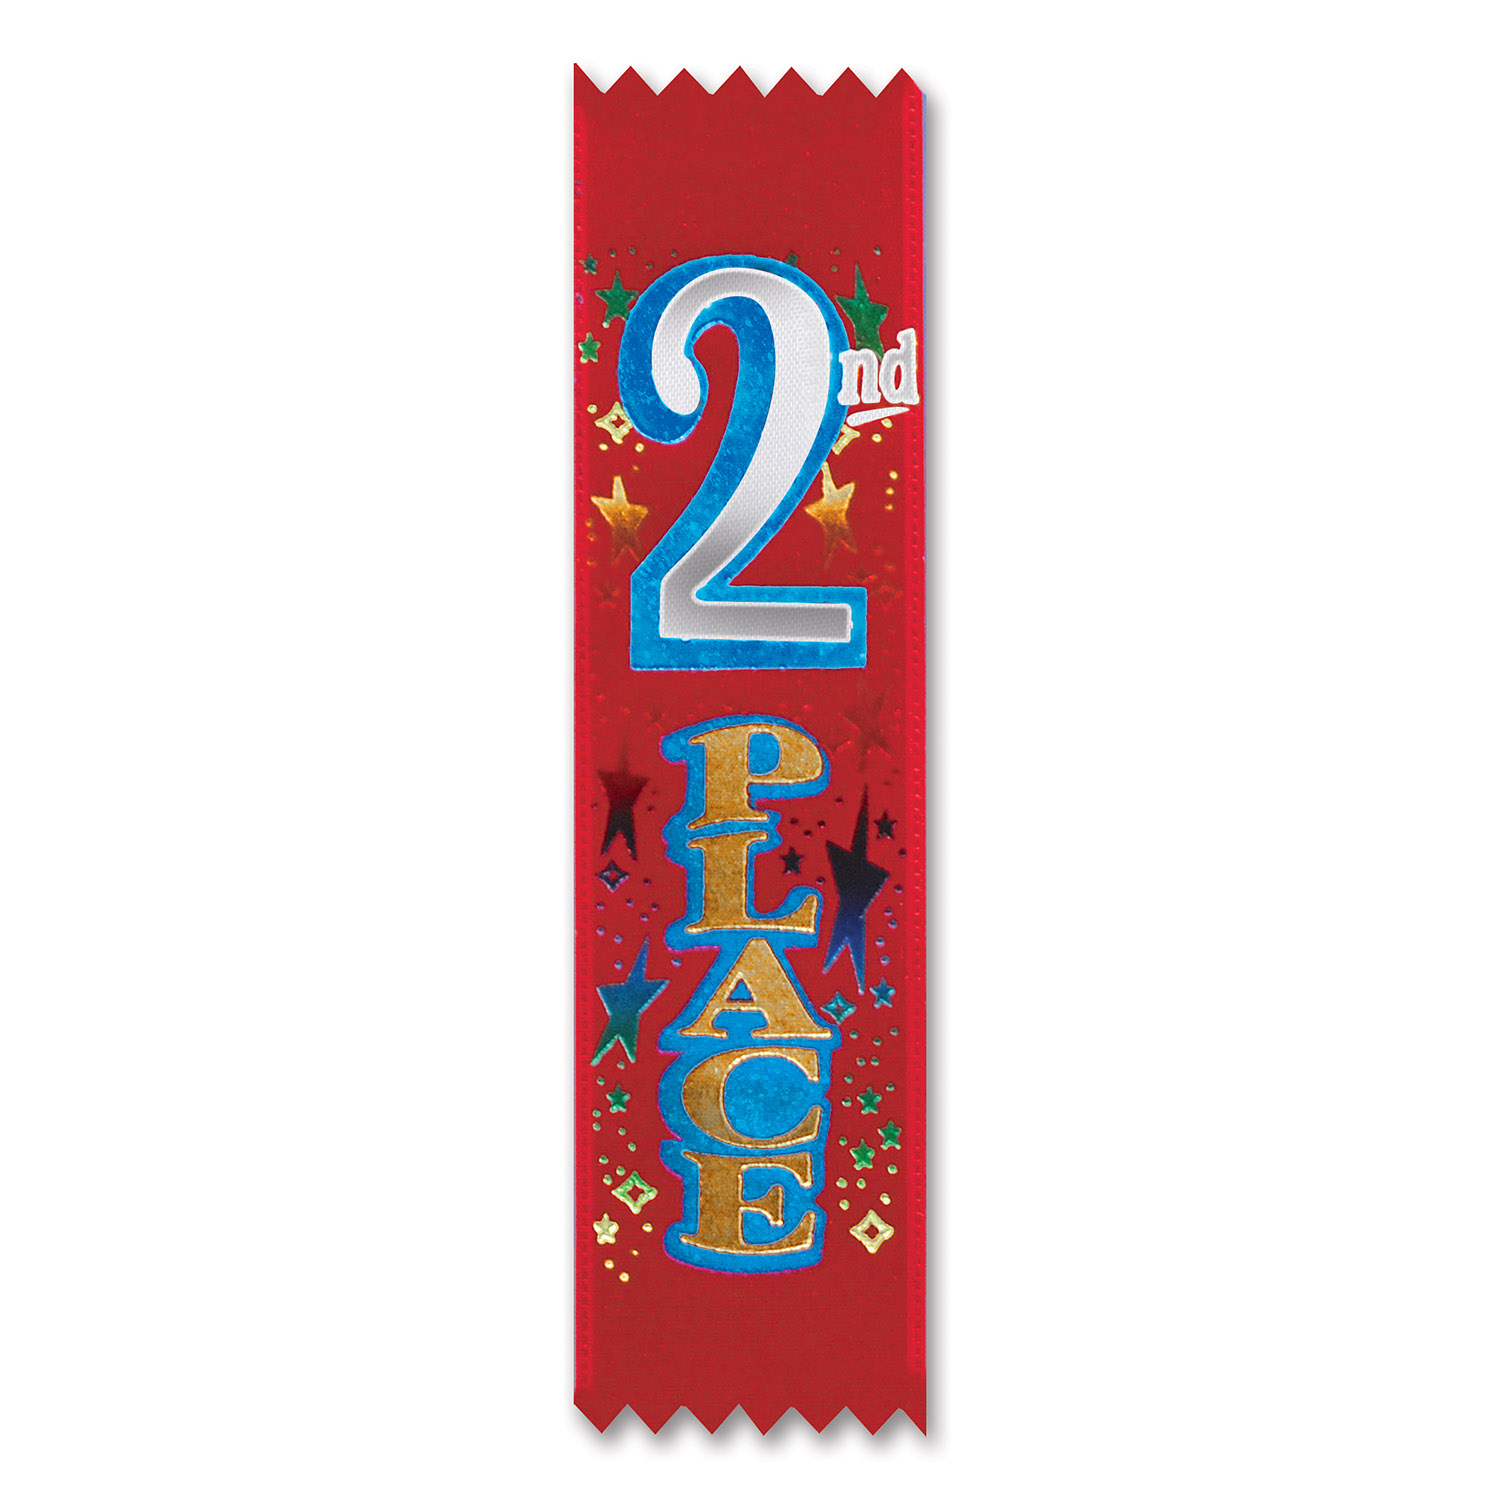 ''''''''''2nd'''''''''''''''' Place VALUE Pack Ribbons''''''''''